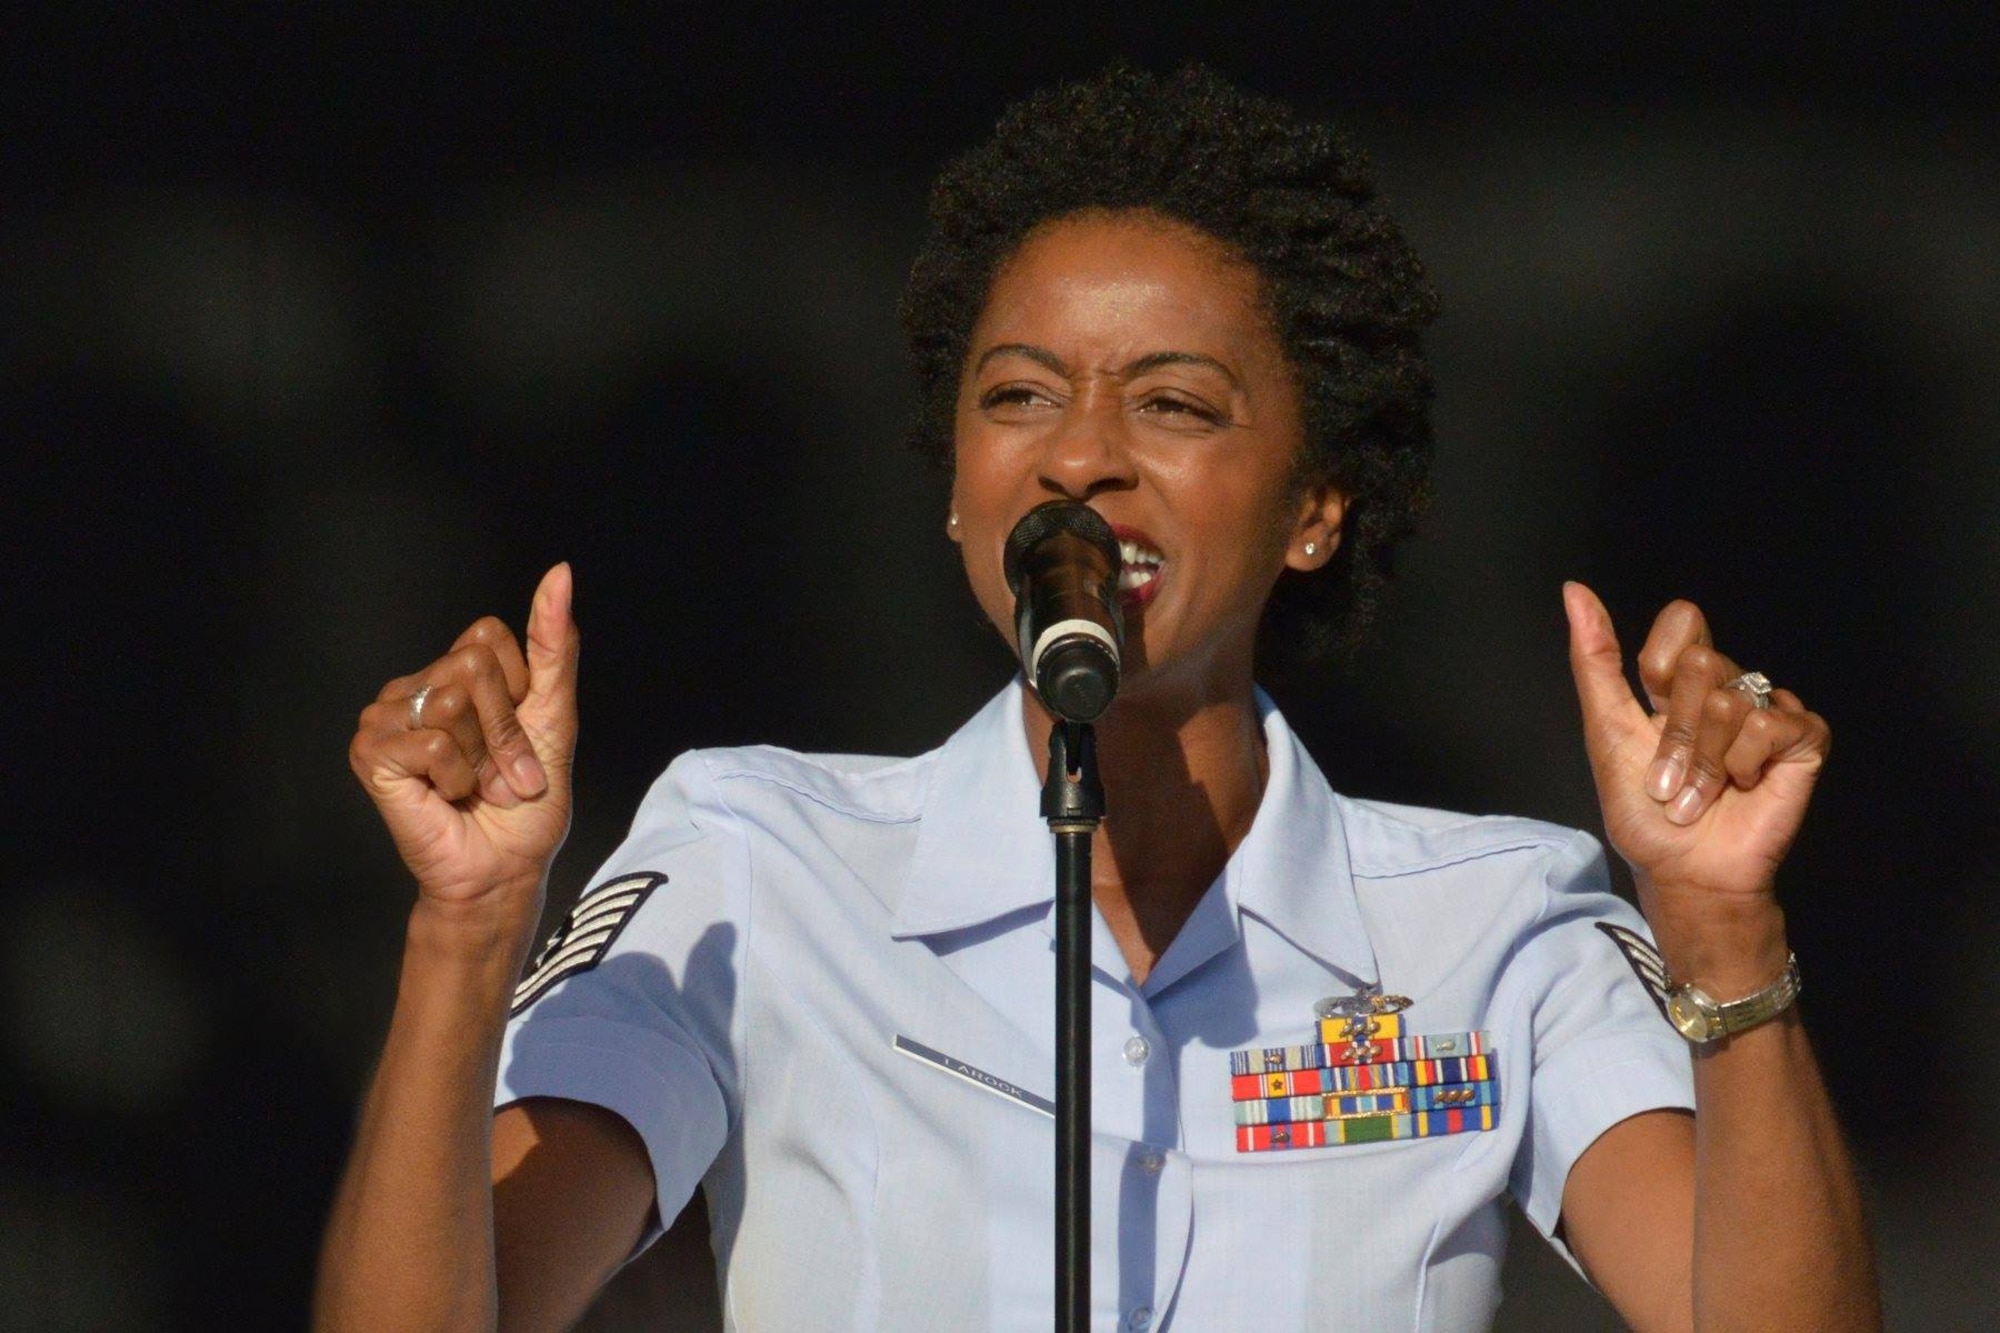 DAYTON, Ohio - TSgt.Felita LaRock performing with the Air Force Band of Flight in July 2014 at the Fraze Pavilion. (U.S. Air Force photo by Ken LaRock)